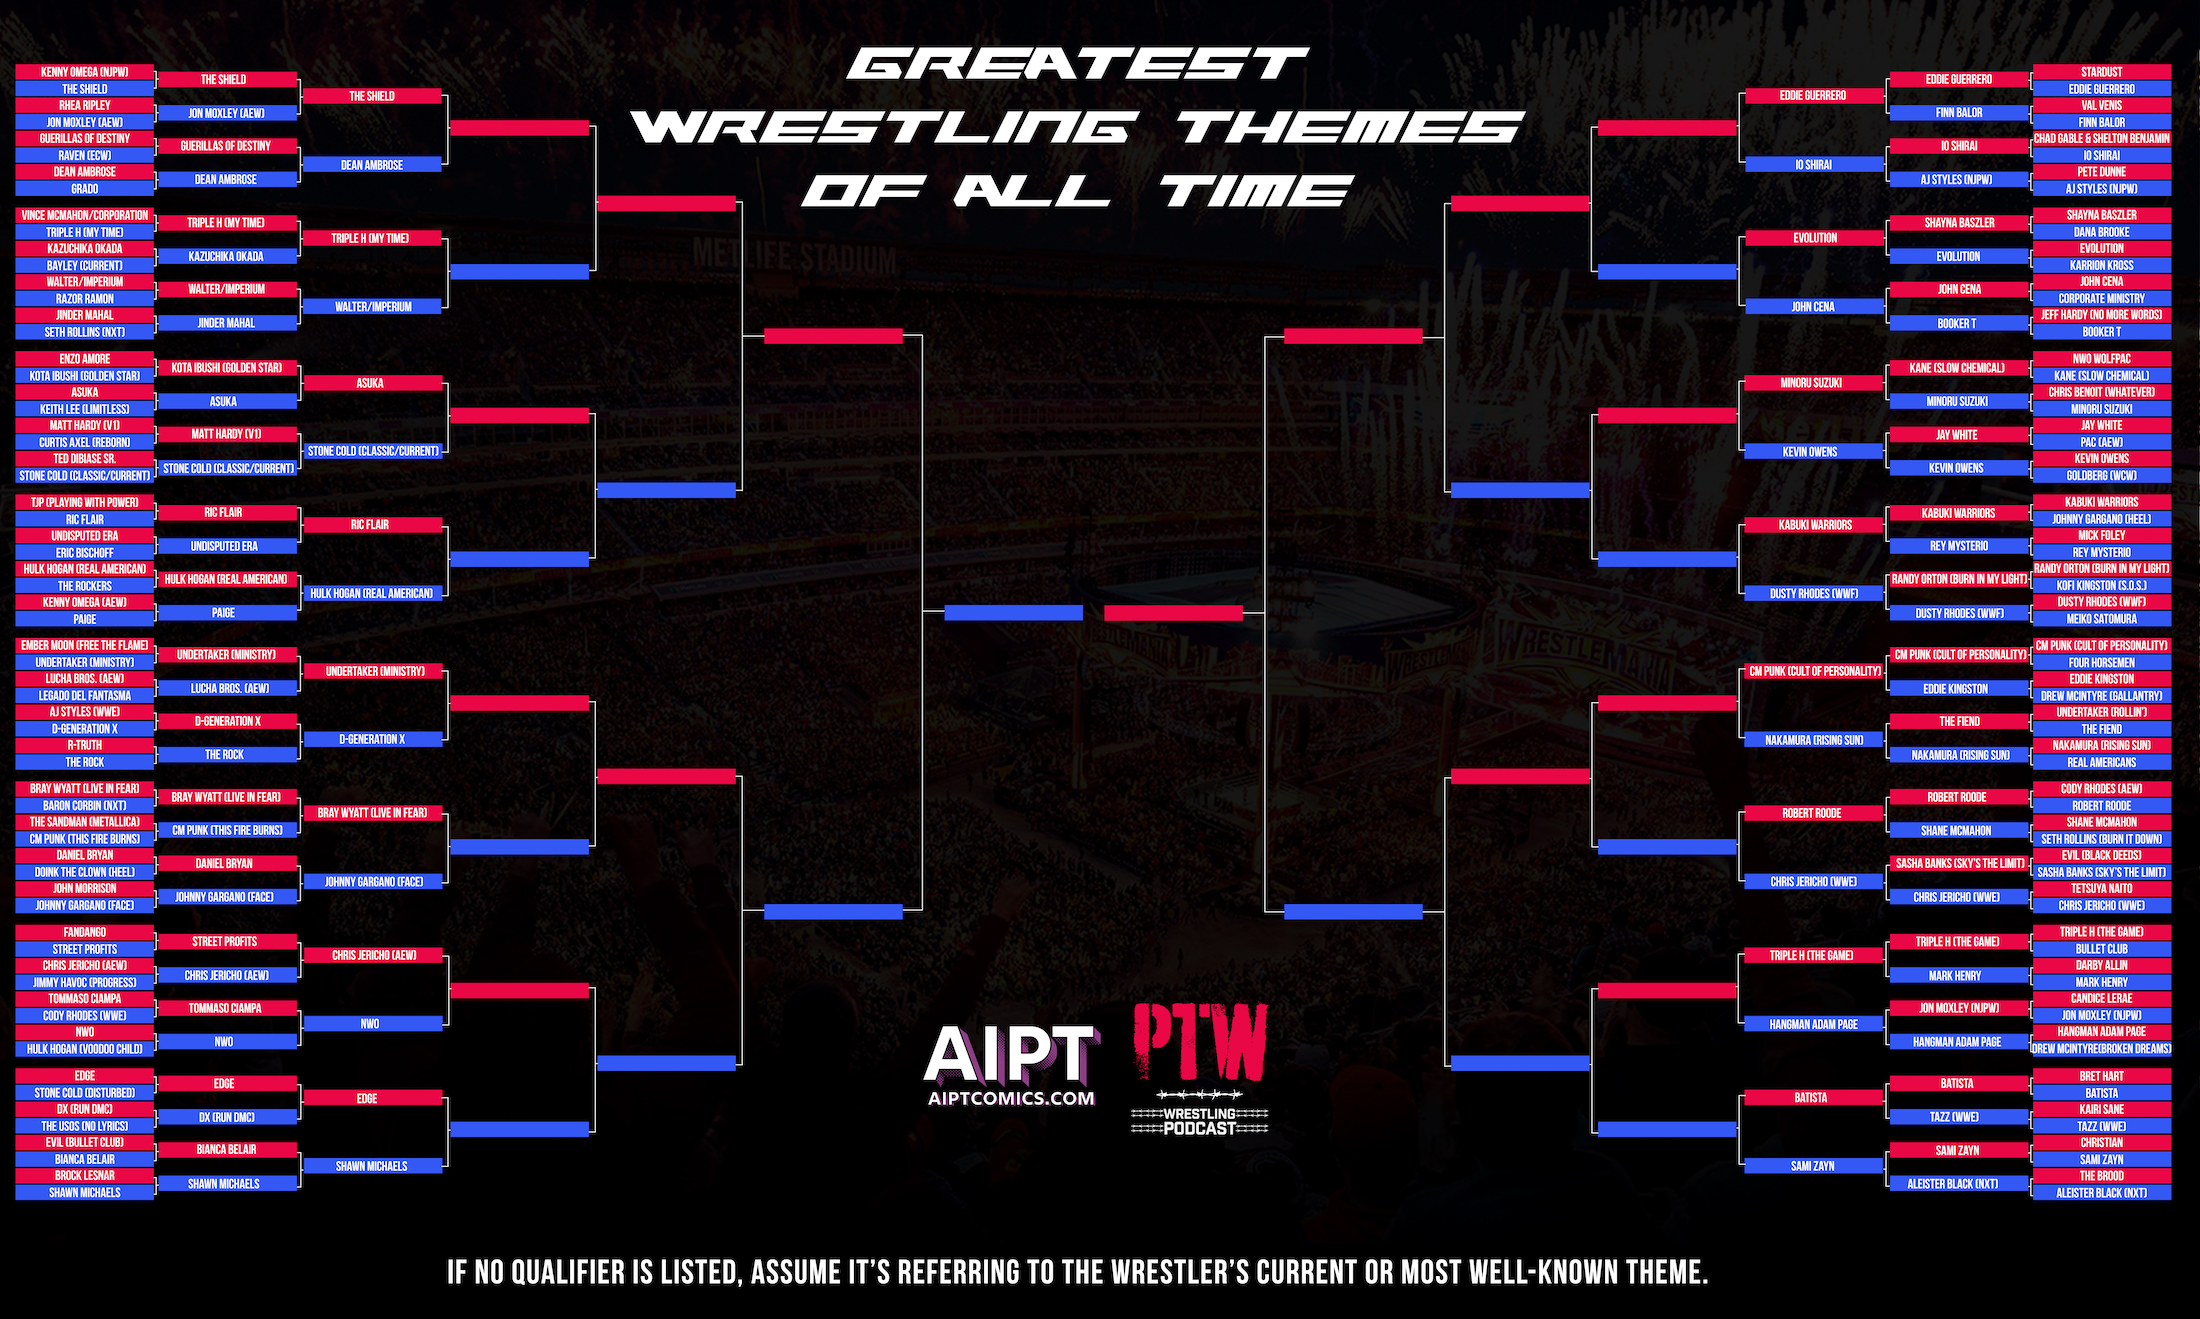 The Greatest Wrestling Themes of All Time: Round 2 B results